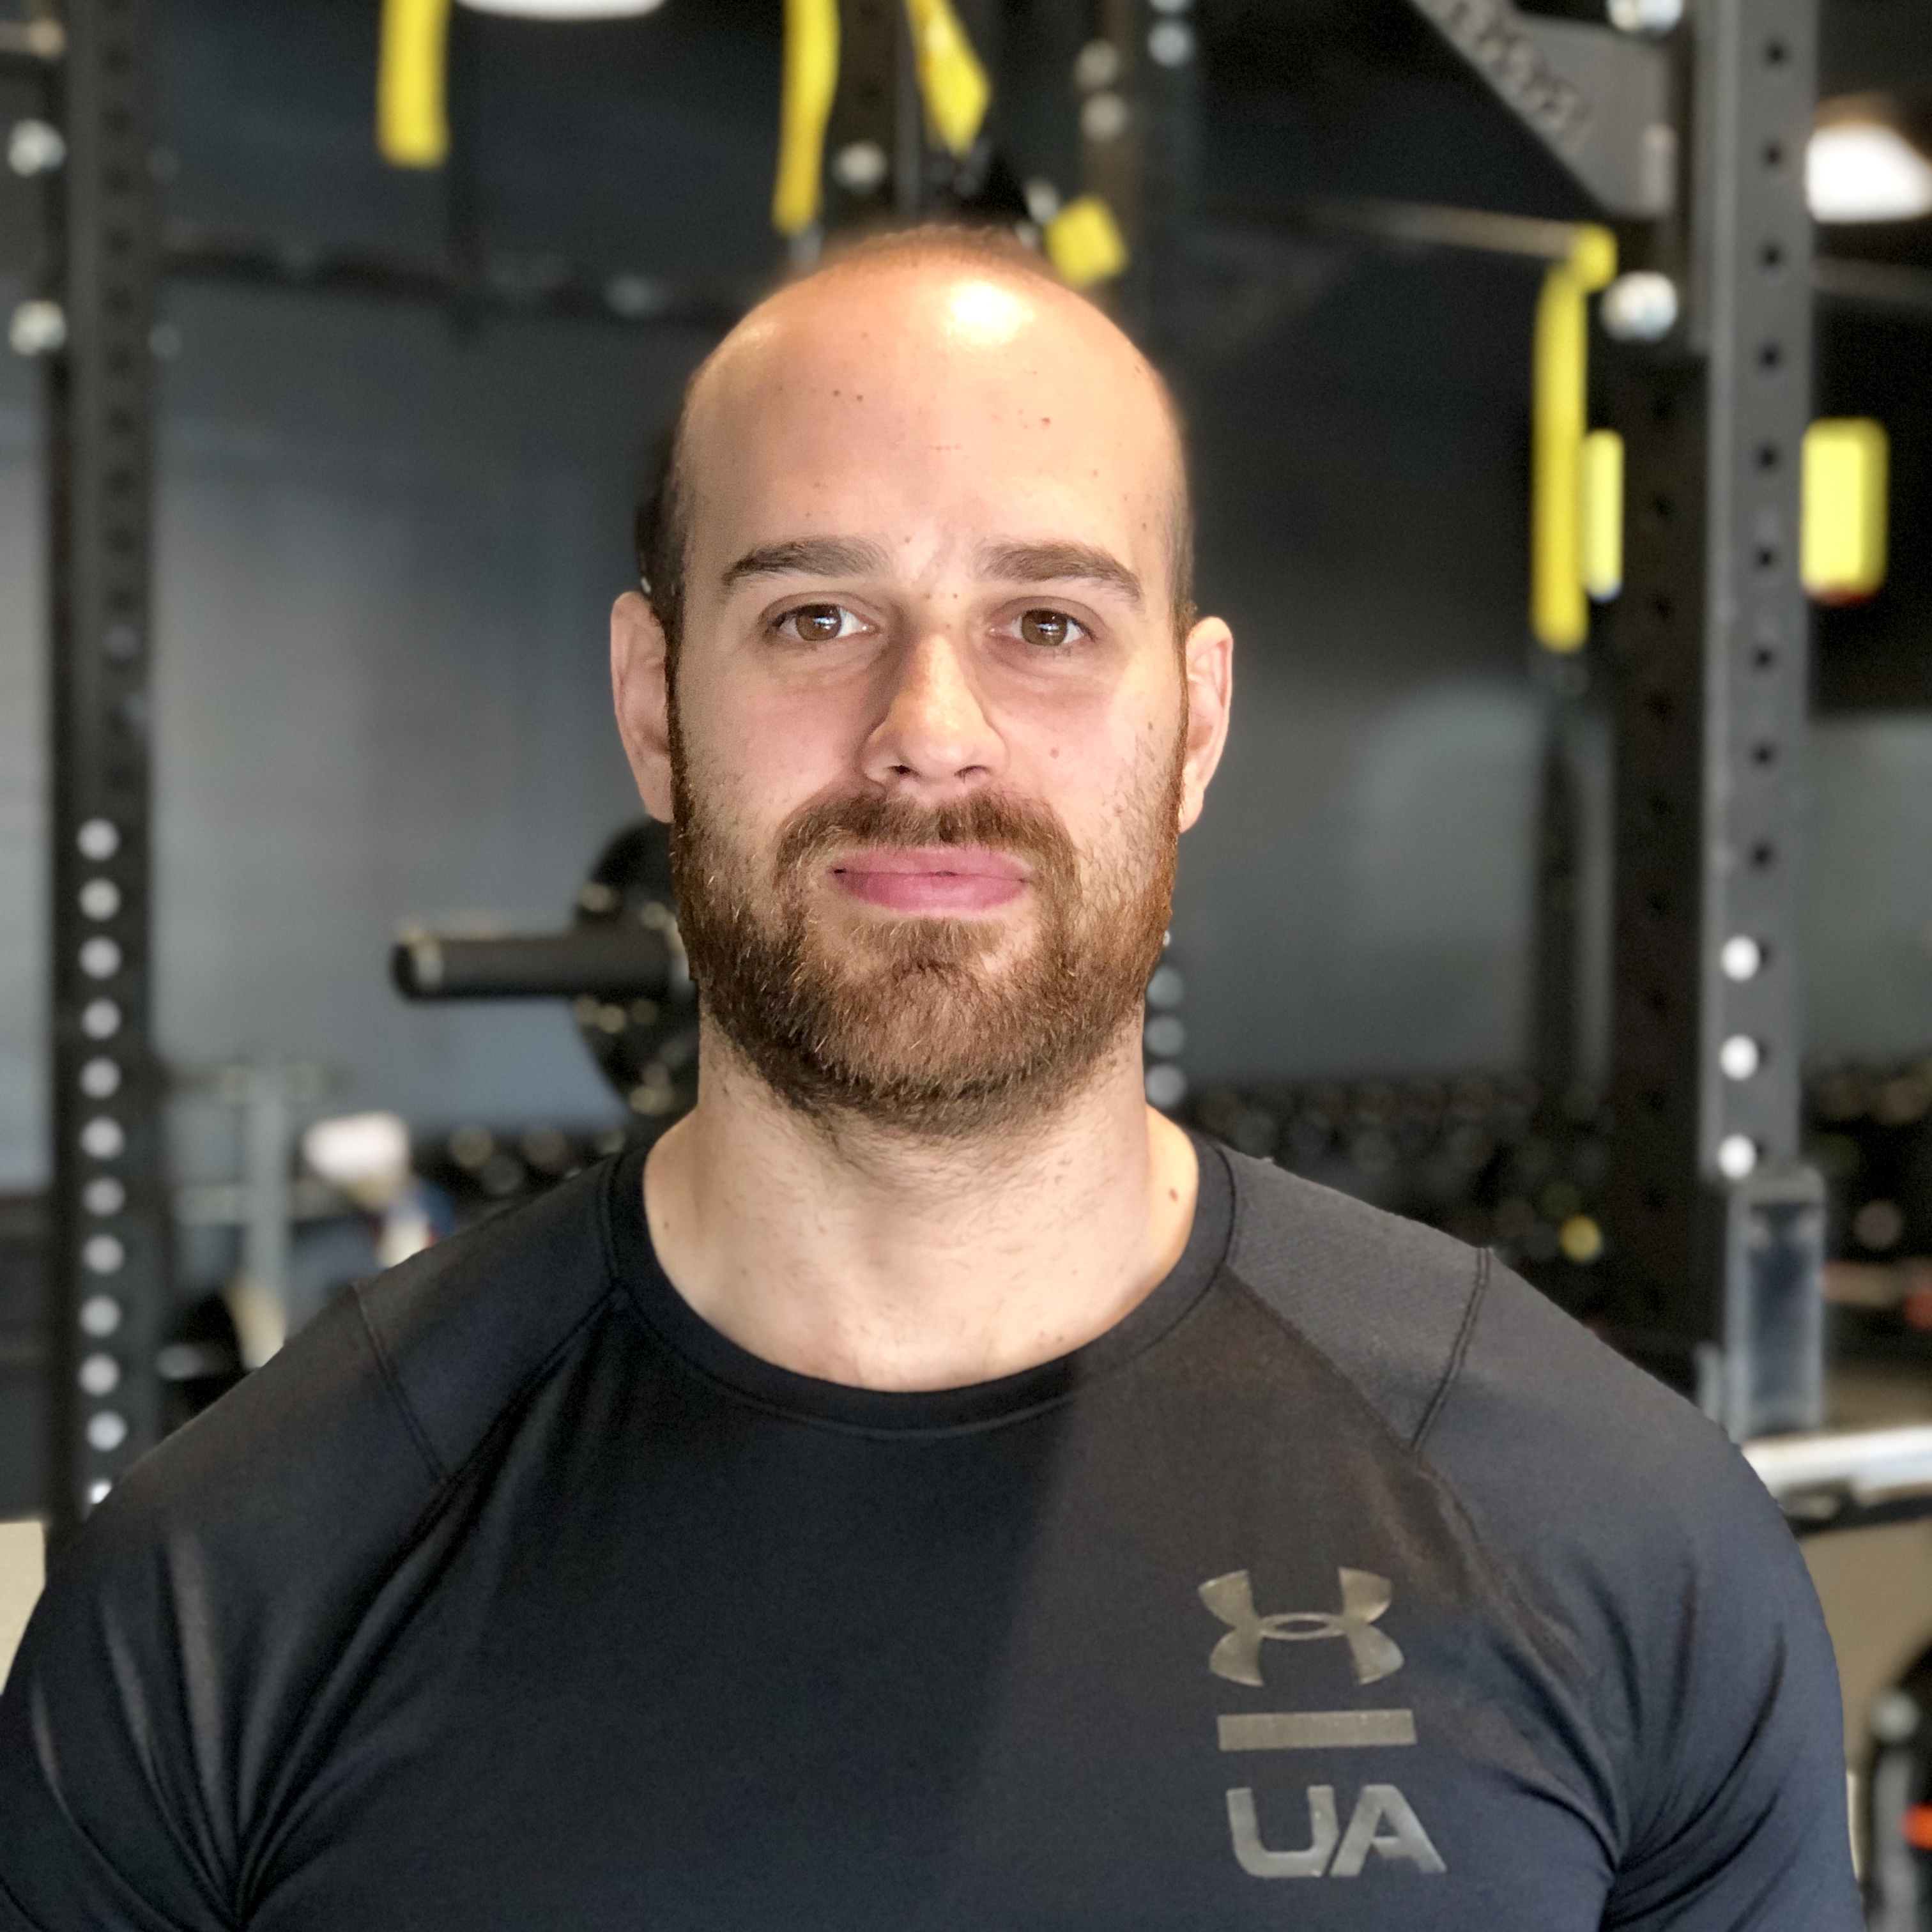 FX Fitness Trainer, FX Fitness Team, Personal Trainer, Male, Brown Eyes, Facial Hair, Under Armour Apparel, Hunt Valley Personal Trainer